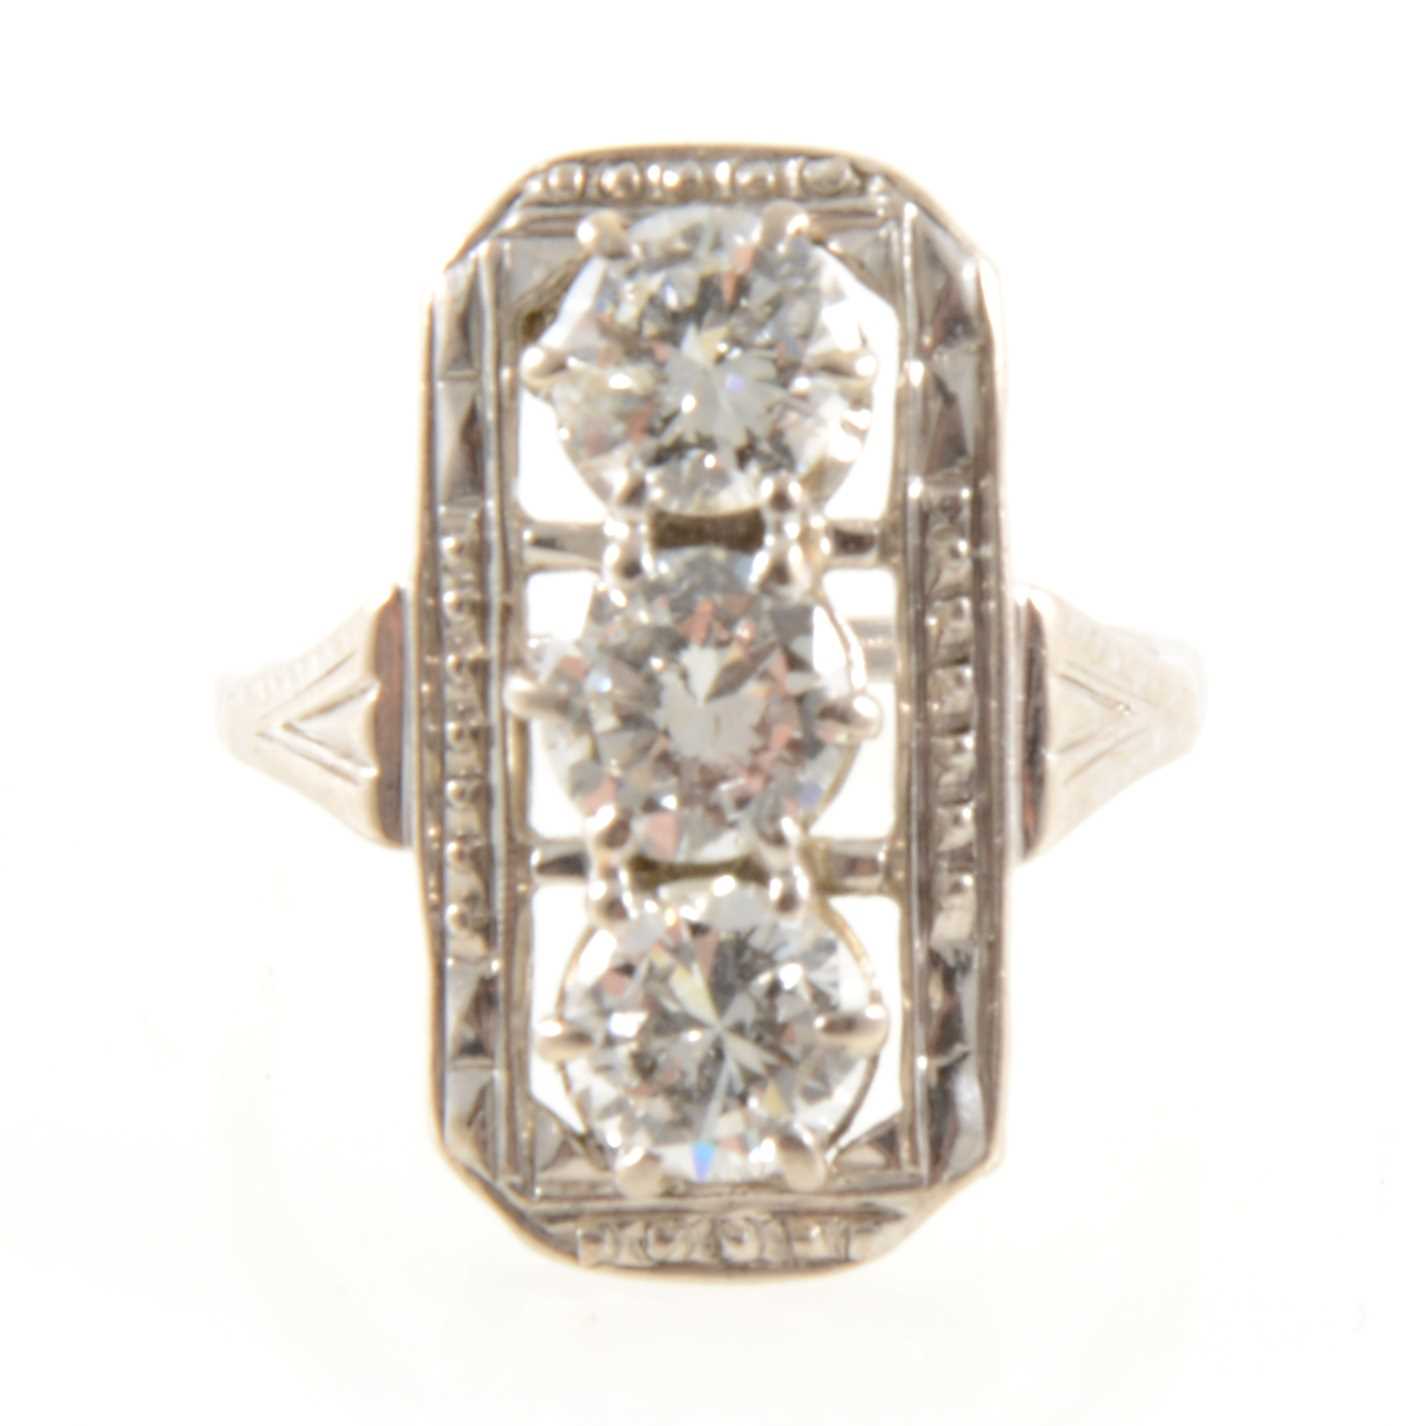 Lot 185 - A diamond three stone ring in the Art Deco style